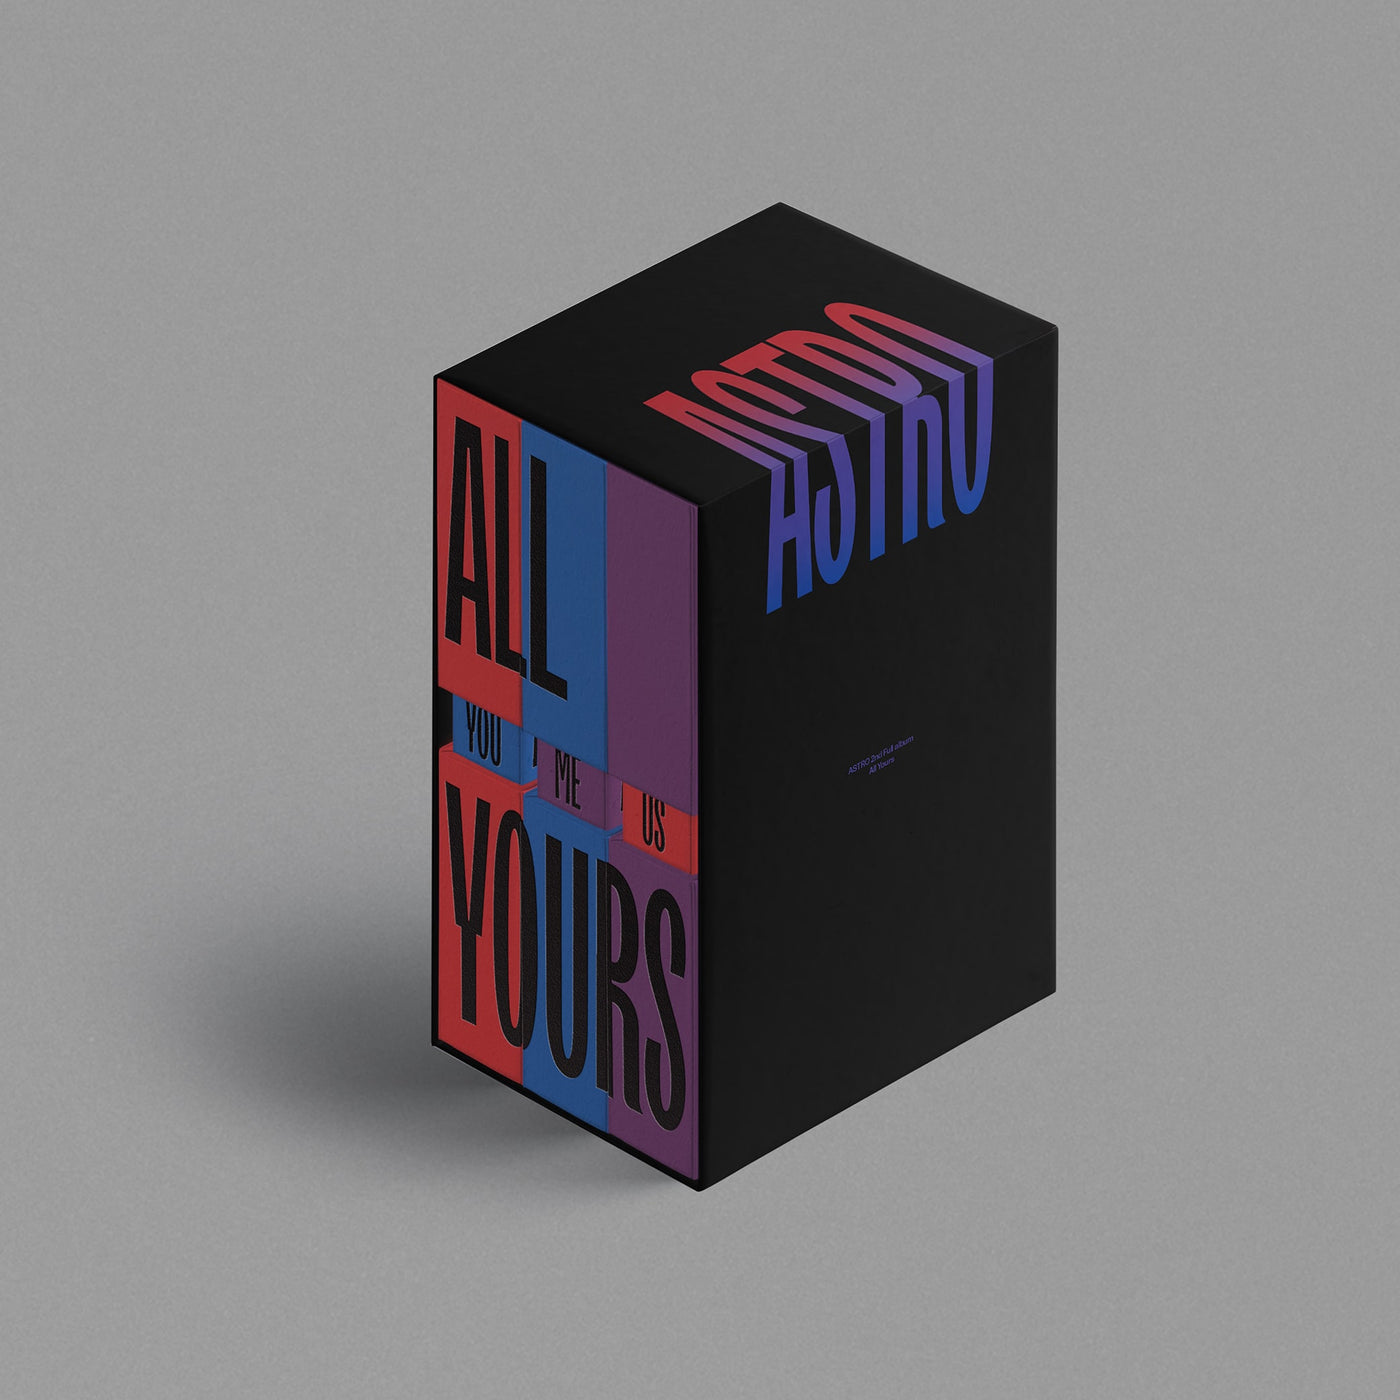 ASTRO 2nd Album - [All Yours] (Set ver.) 🇰🇷